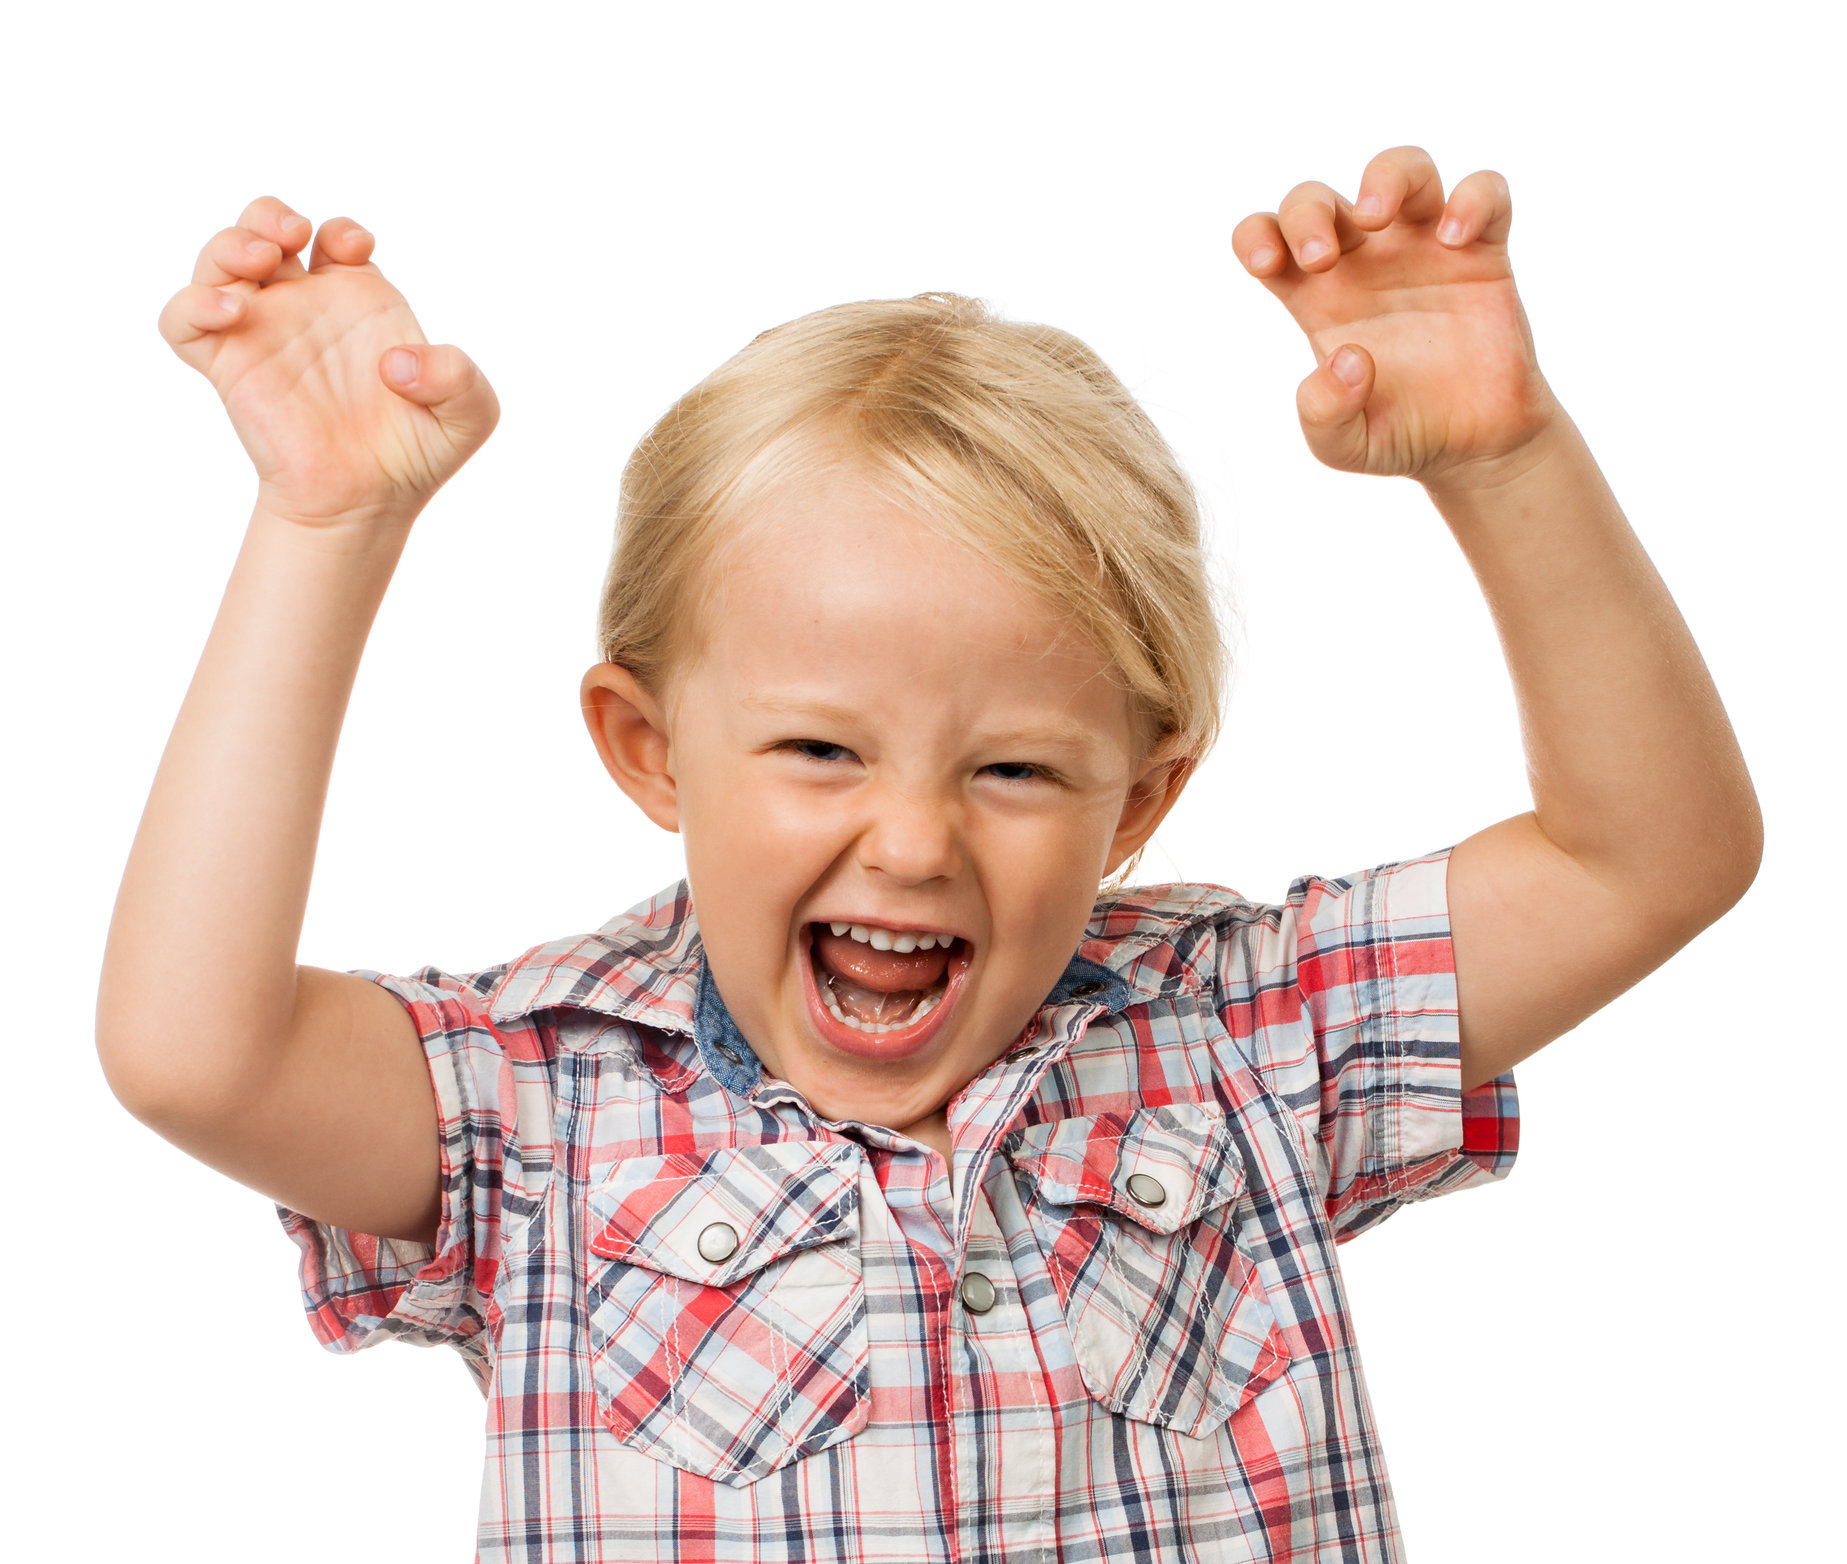 A angry hyperactive young boy yelling. Isolated on white.